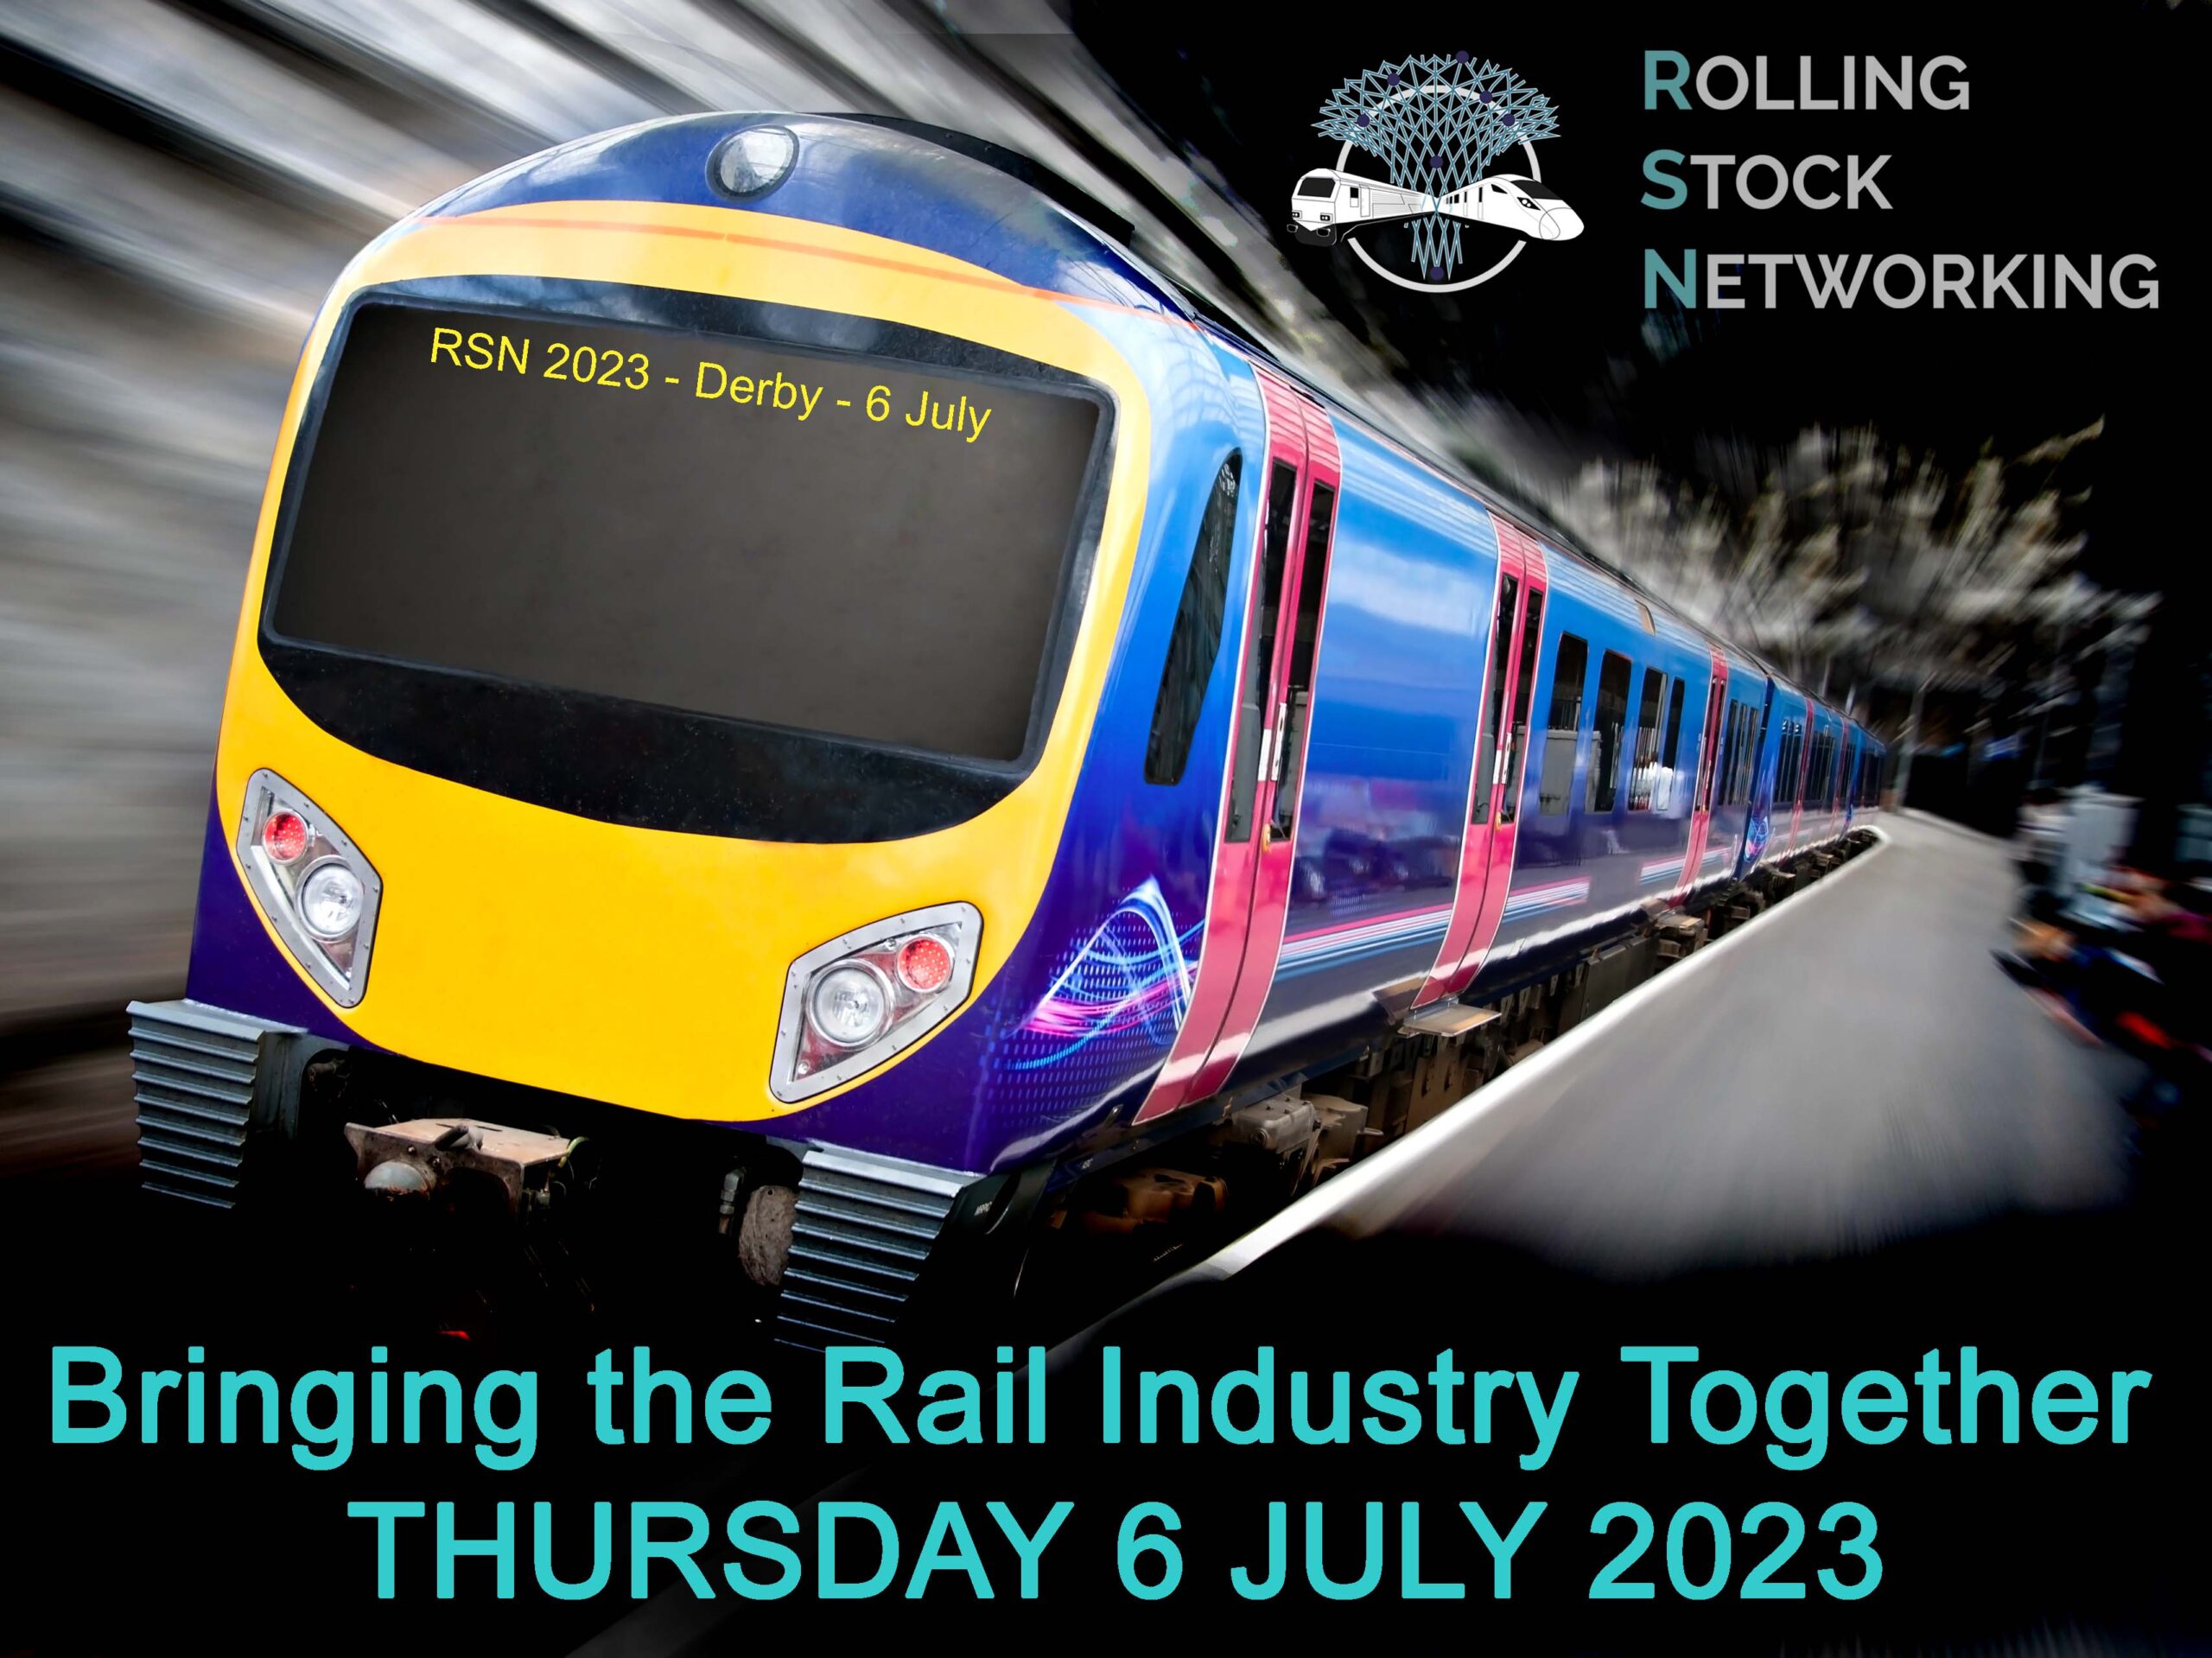 Rolling Stock Networking | Fast Passenger Commuter Train with Motion Blur